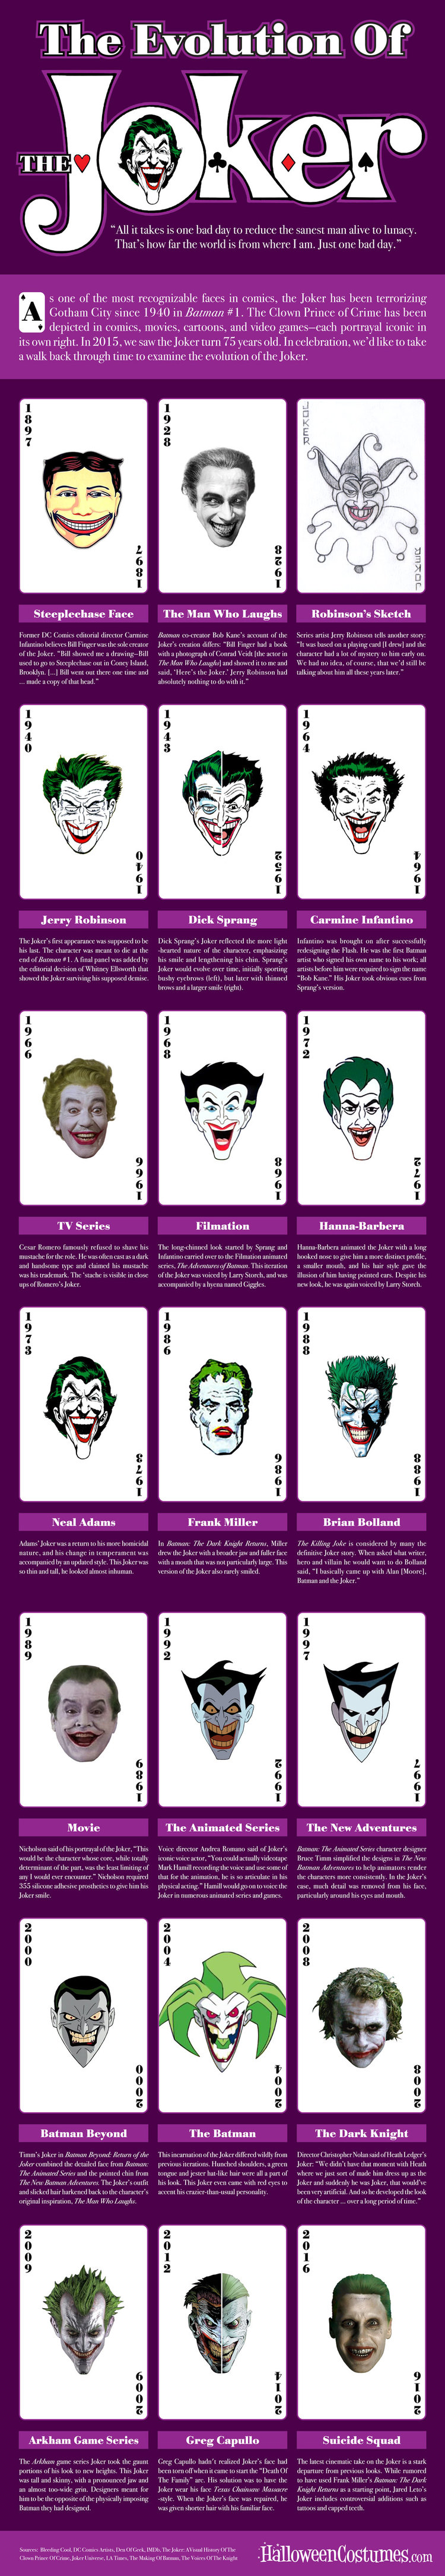 infographic-the-evolution-of-the-joker-in-comics-television-and-film-social.jpg